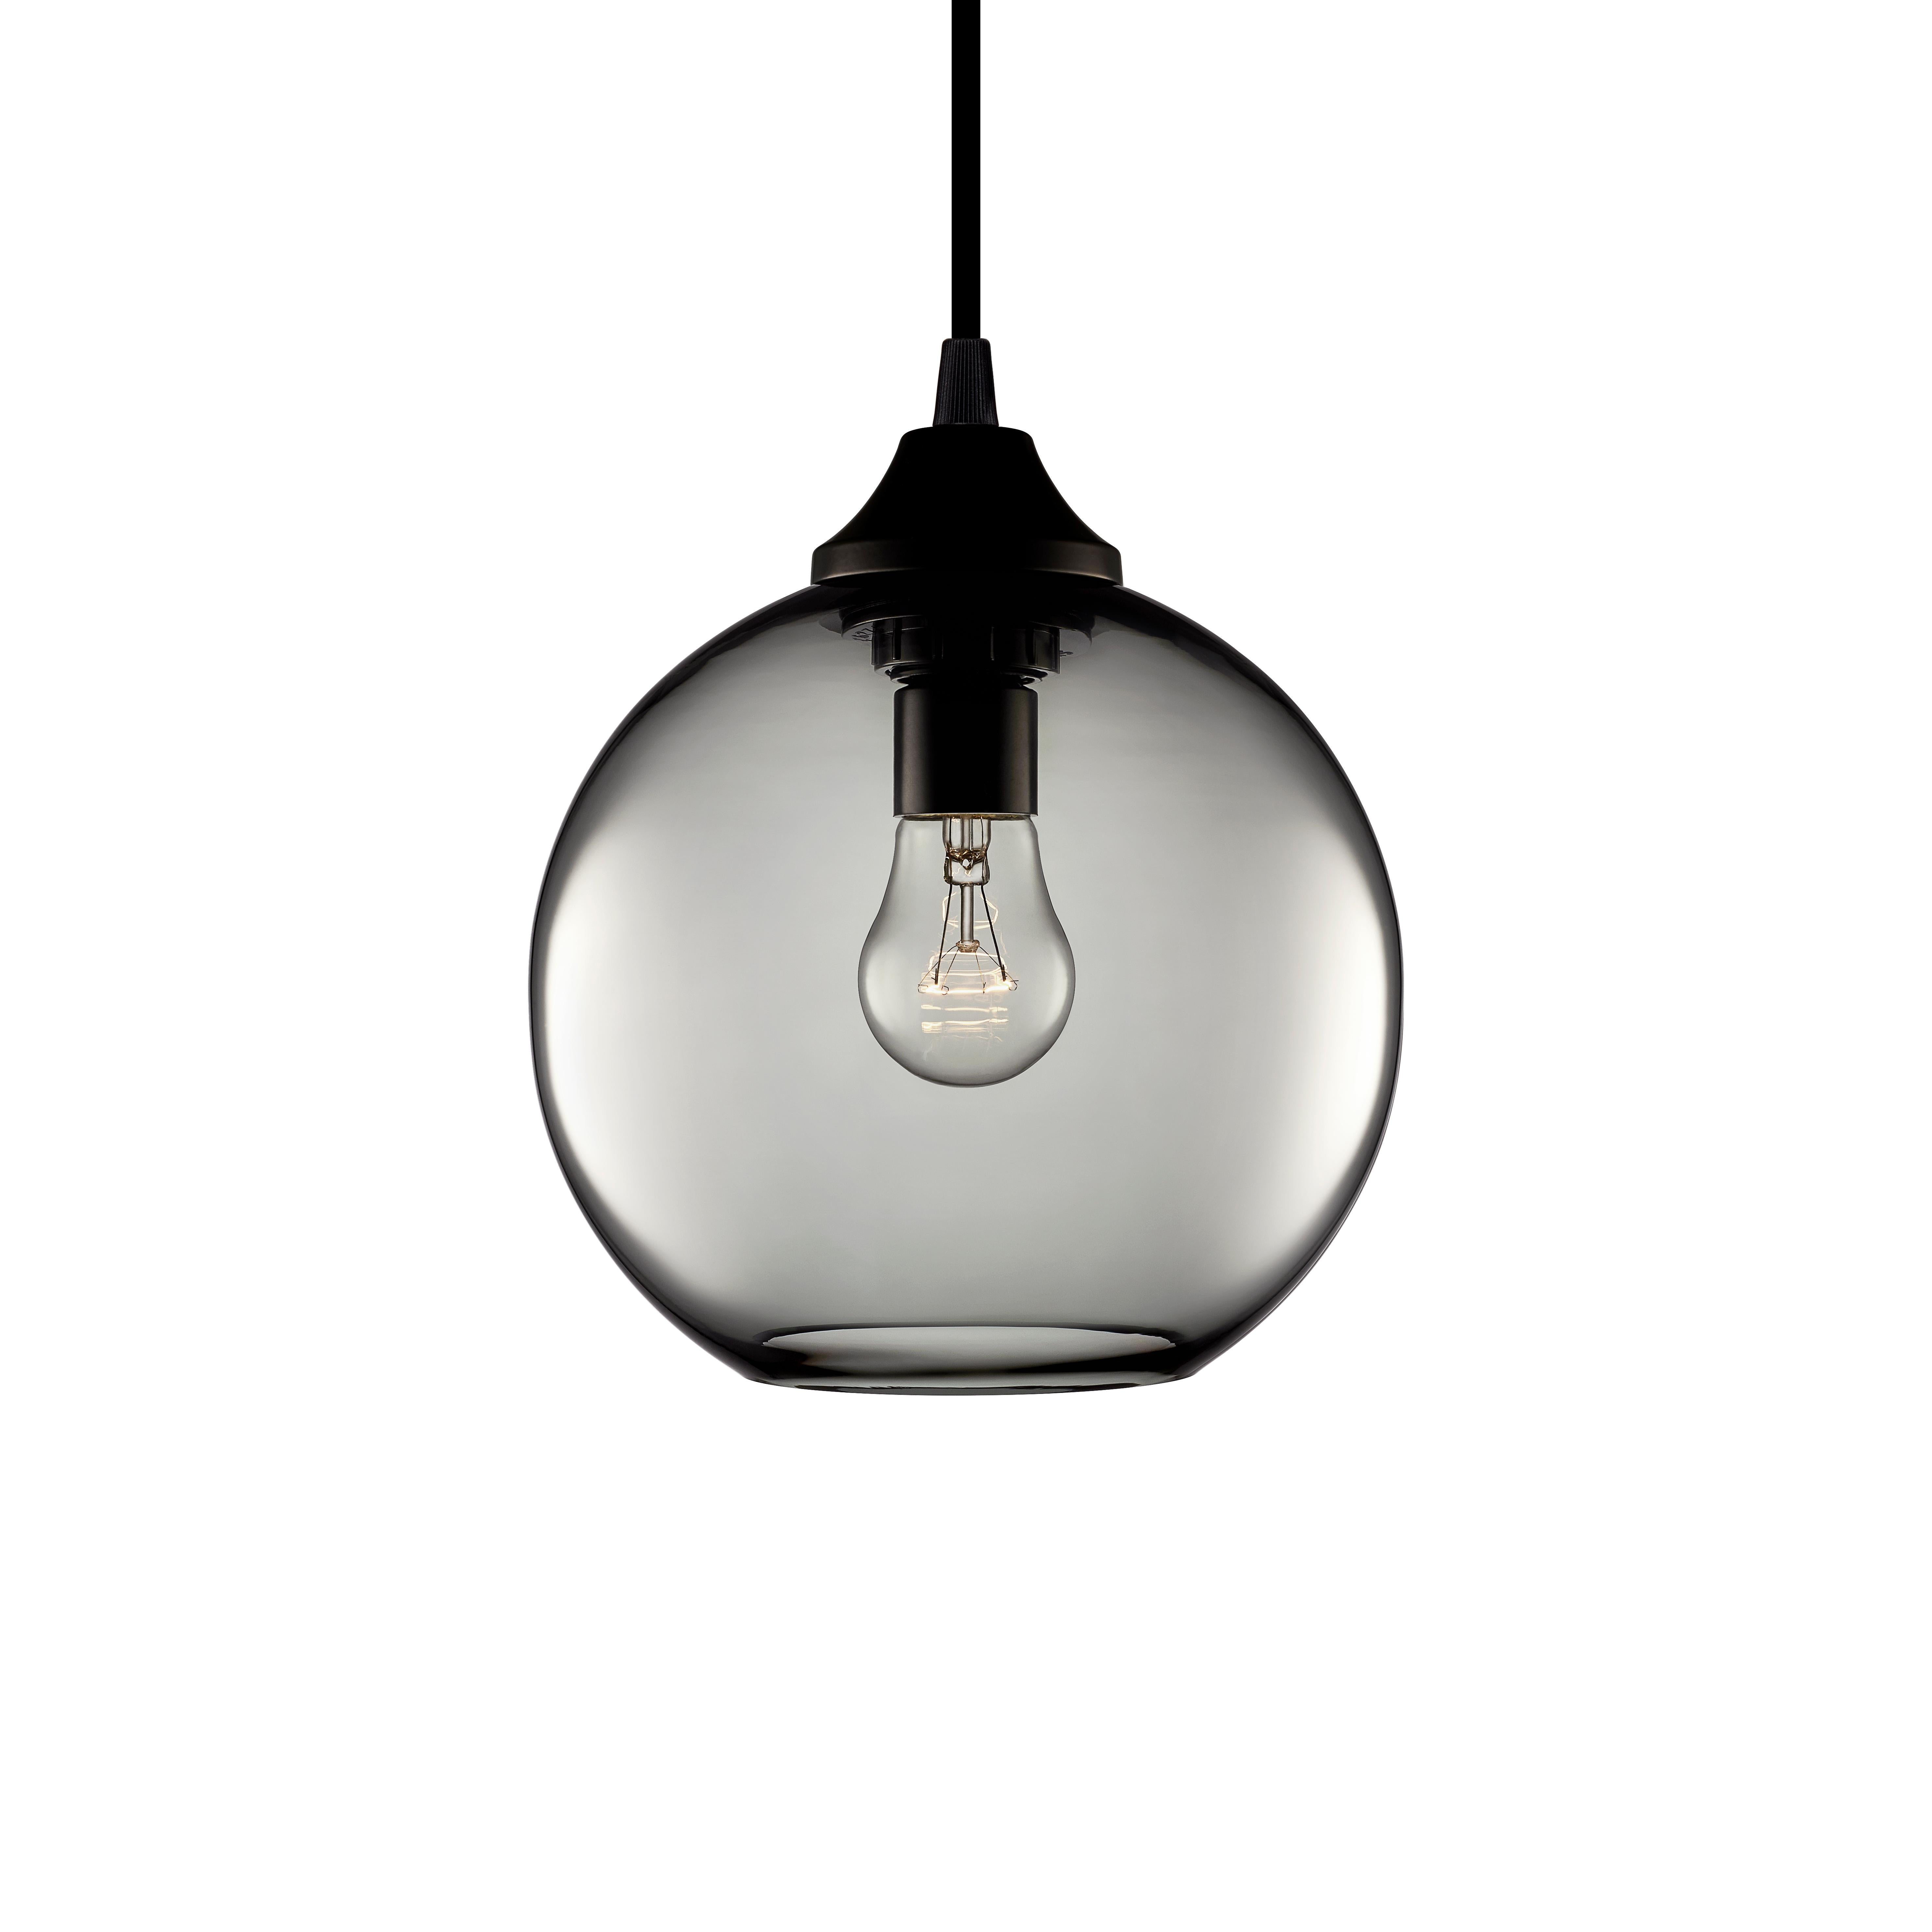 American Solitaire Petite Smoke Handblown Modern Glass Pendant Light, Made in the USA For Sale